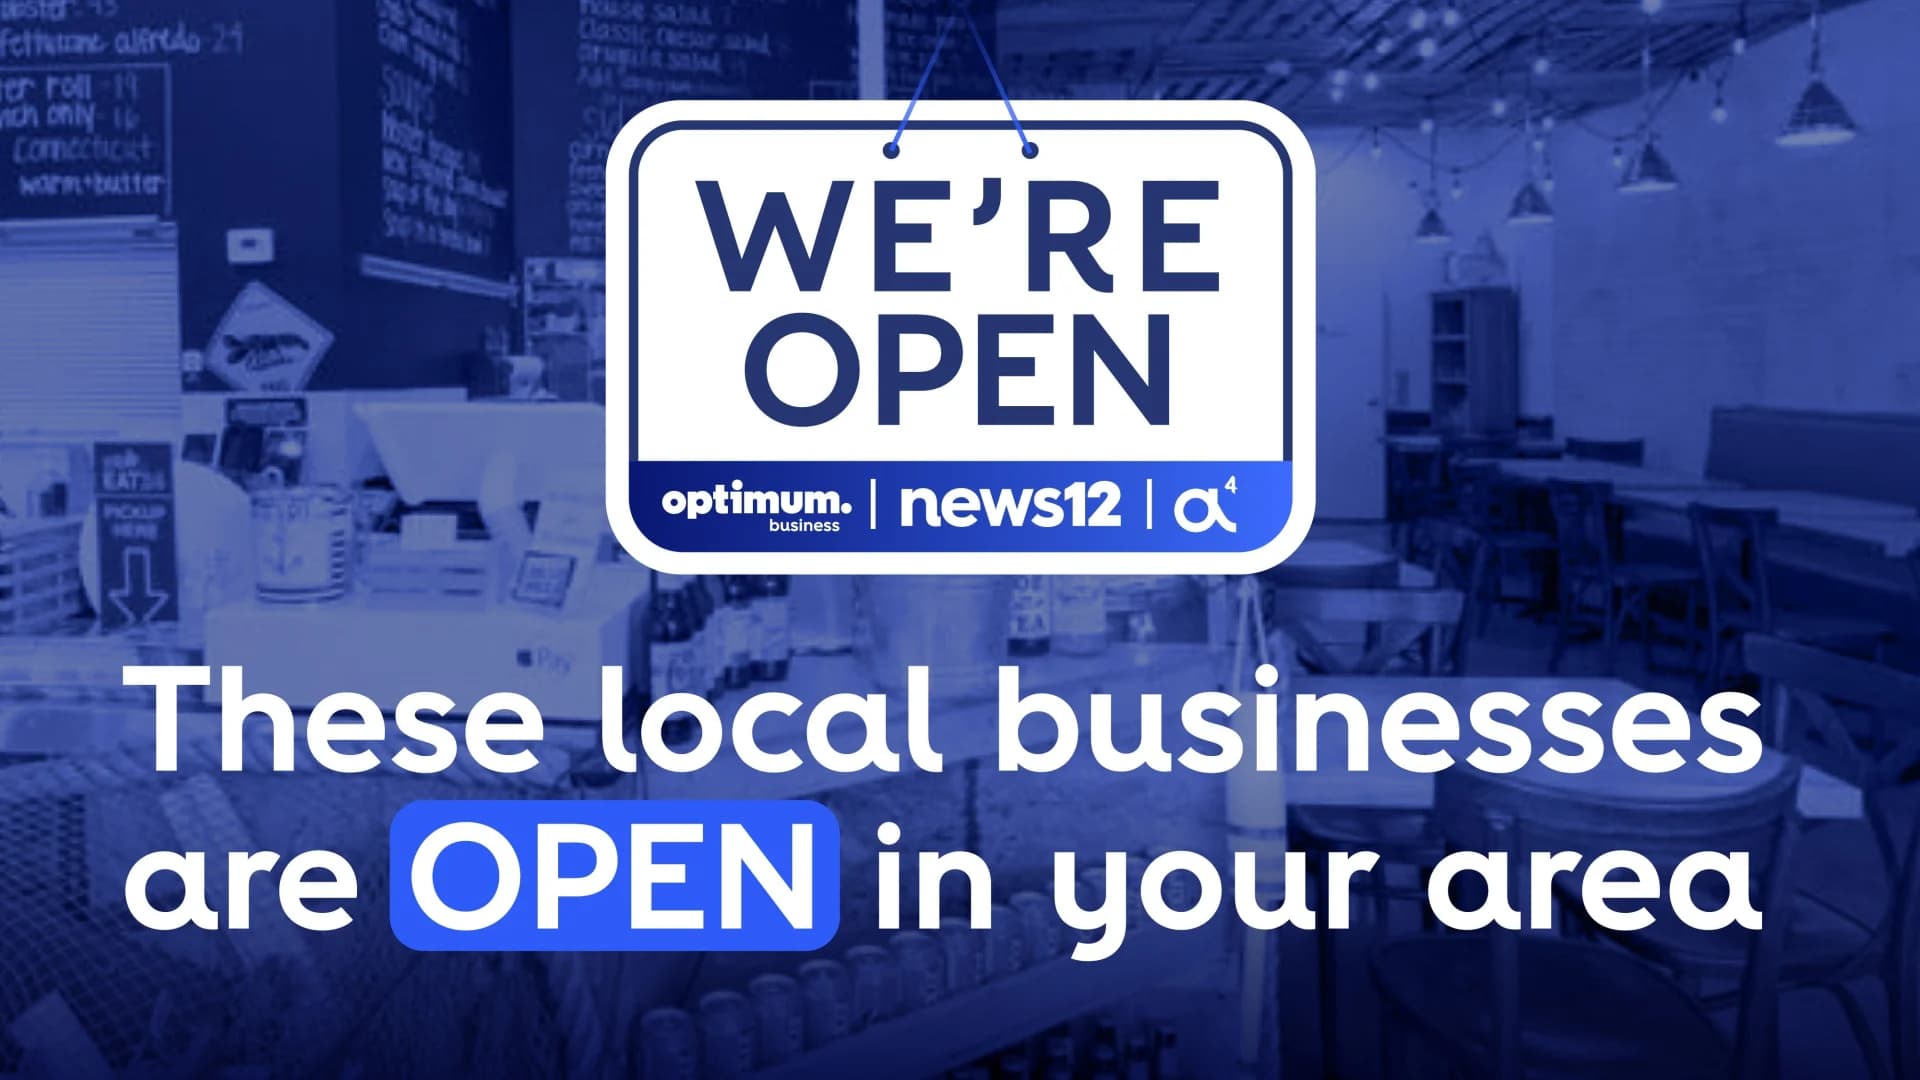 News 12, Optimum Business and a4 Media - We're Open!